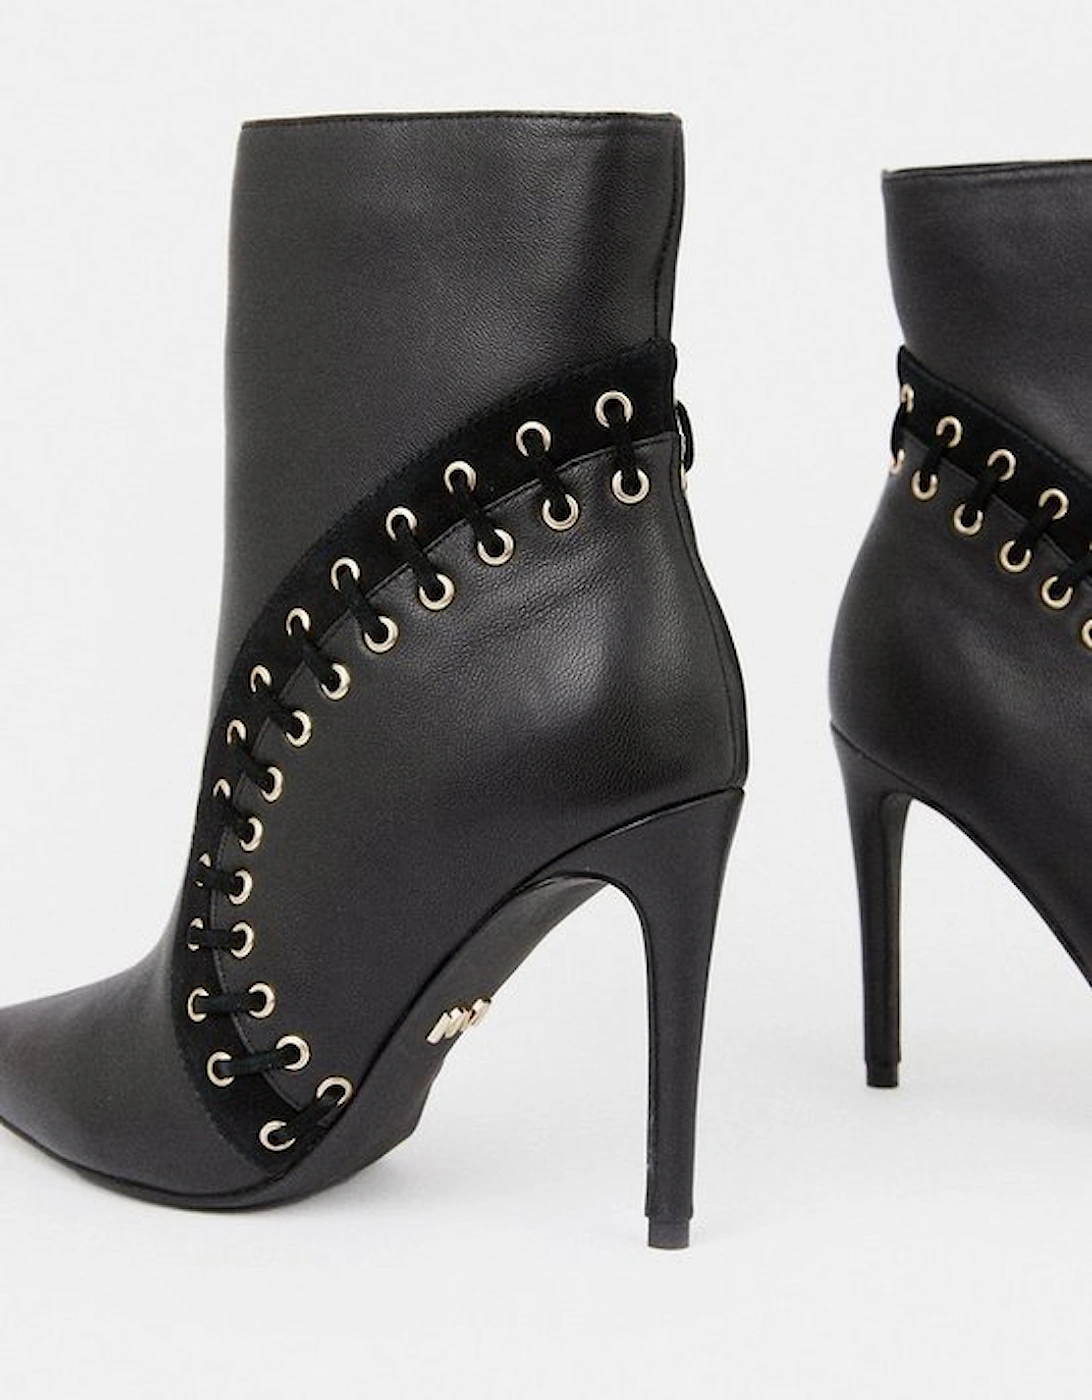 Leather And Suede Eyelet Heeled Boot